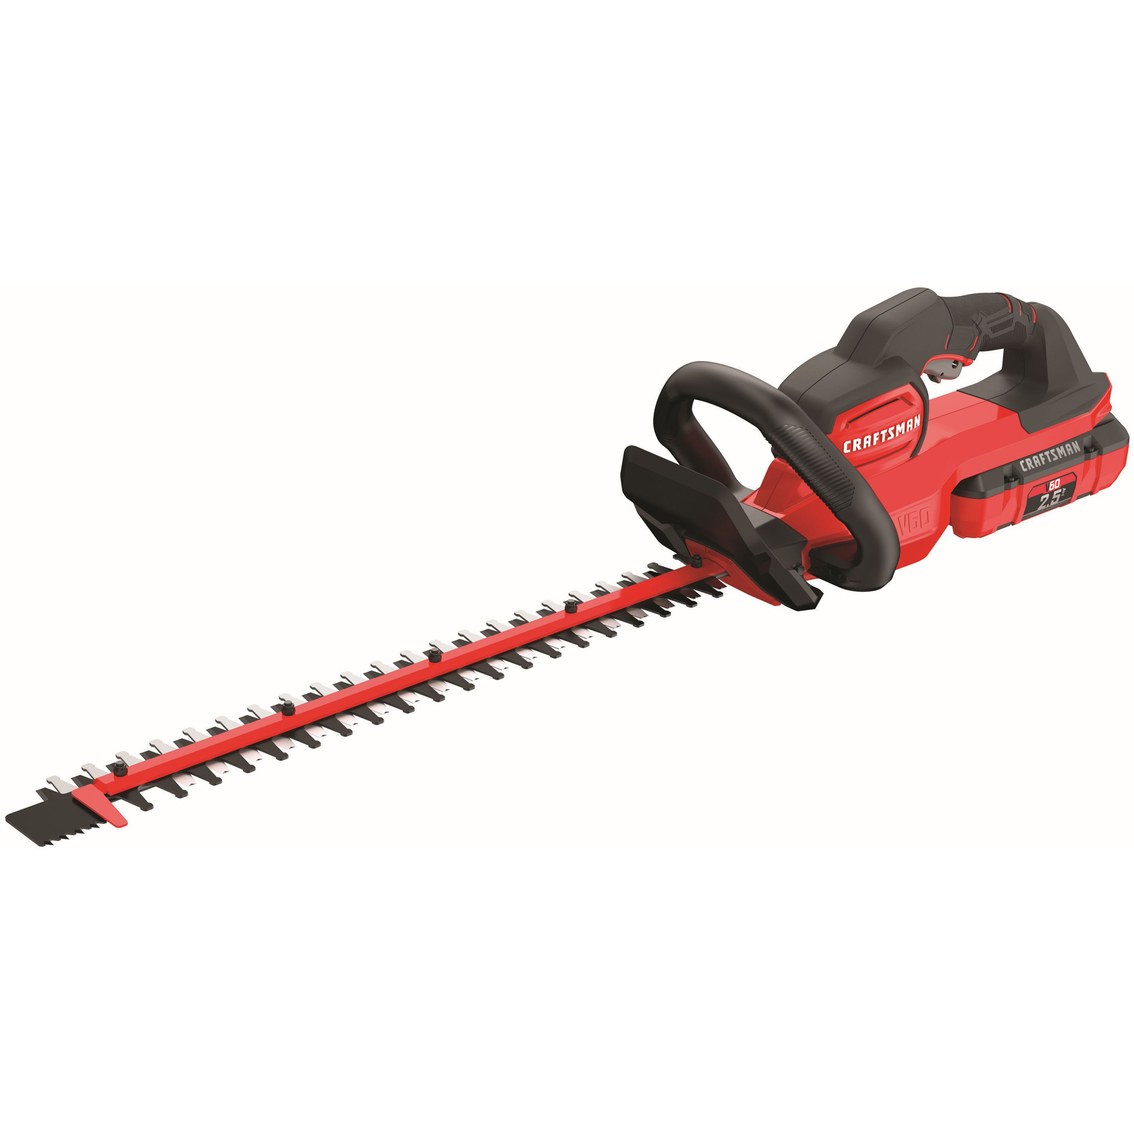 Craftsman V60* Cordless 24 In. Hedge Trimmer Kit | Trimmers, Edgers ...